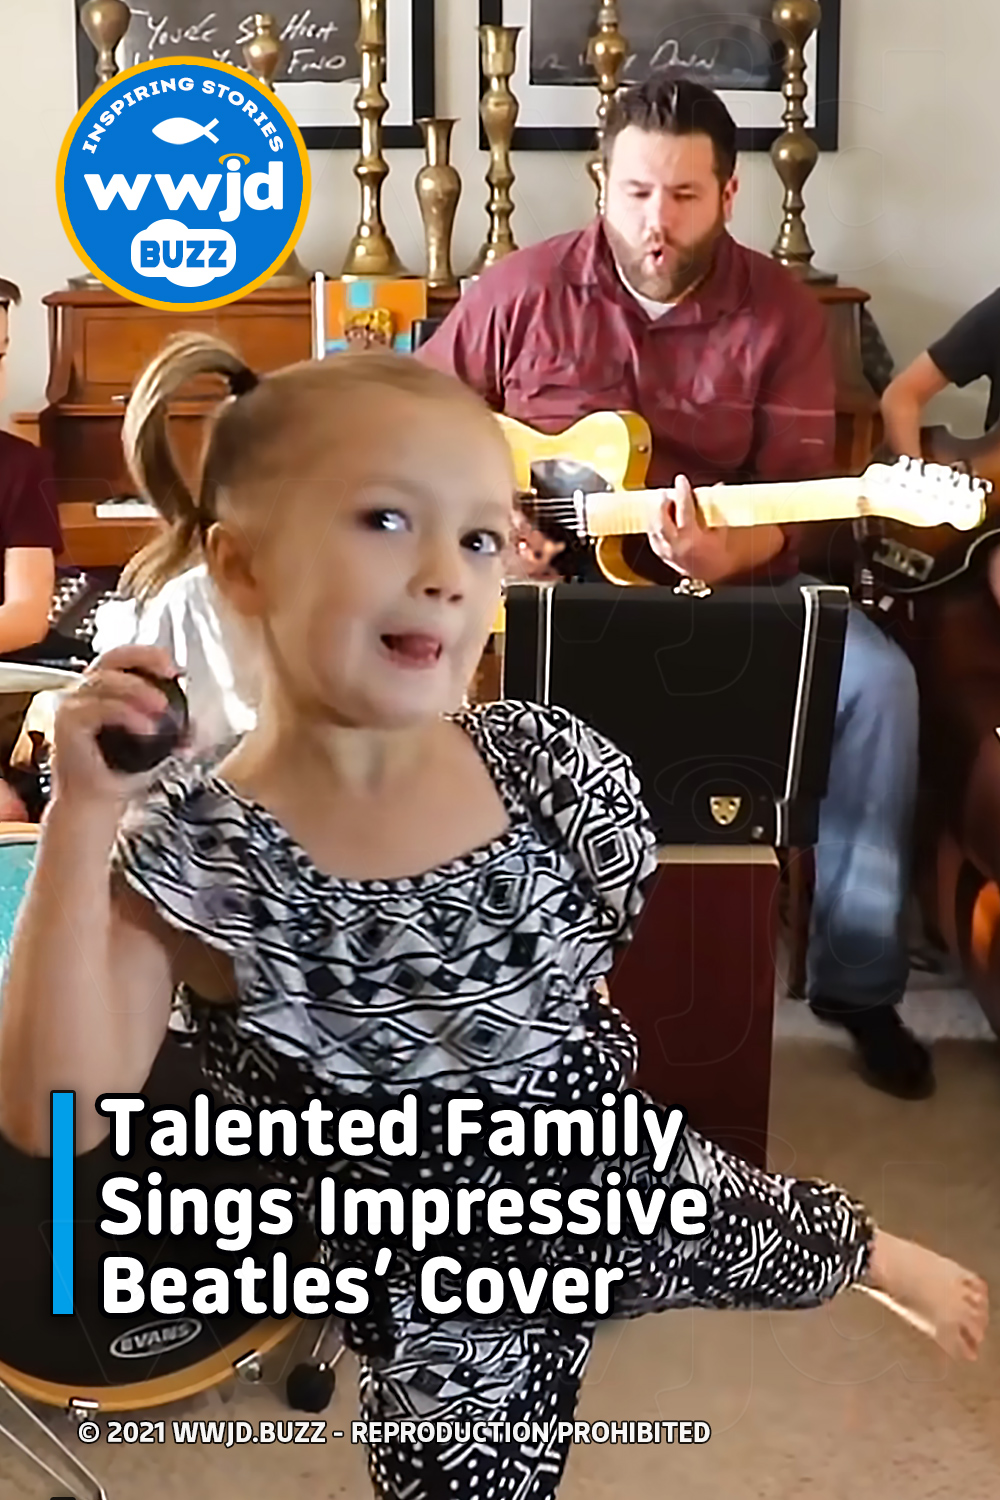 Talented Family Sings Impressive Beatles’ Cover